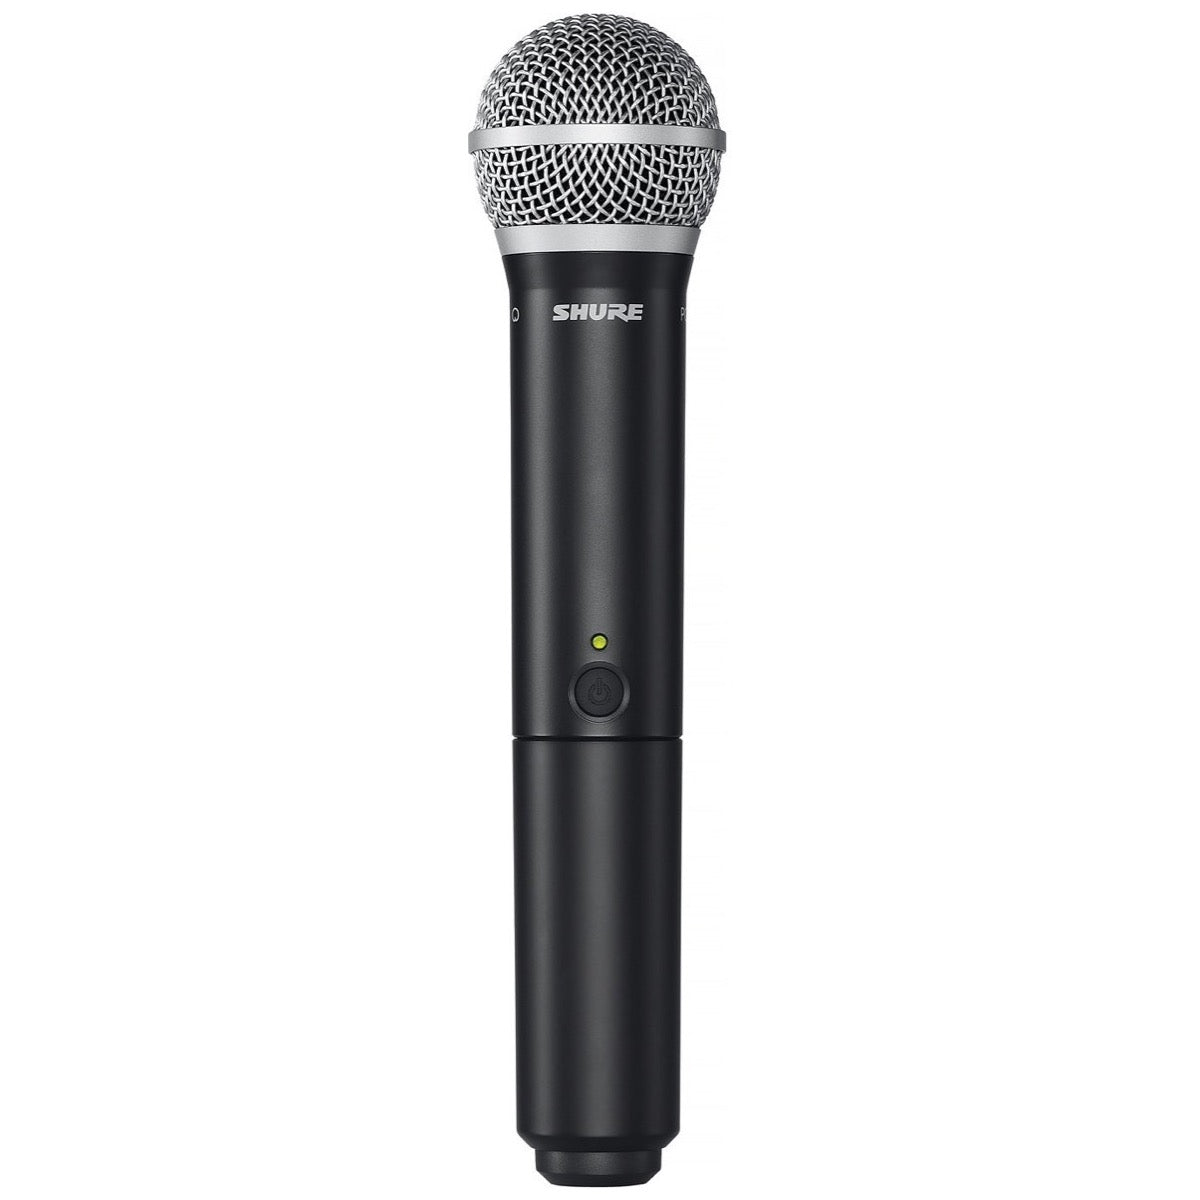 Shure BLX1288/P31 Combination Wireless PGA31 Headset and PG58 Handheld Microphone System, Band H10 (542-572 MHz)